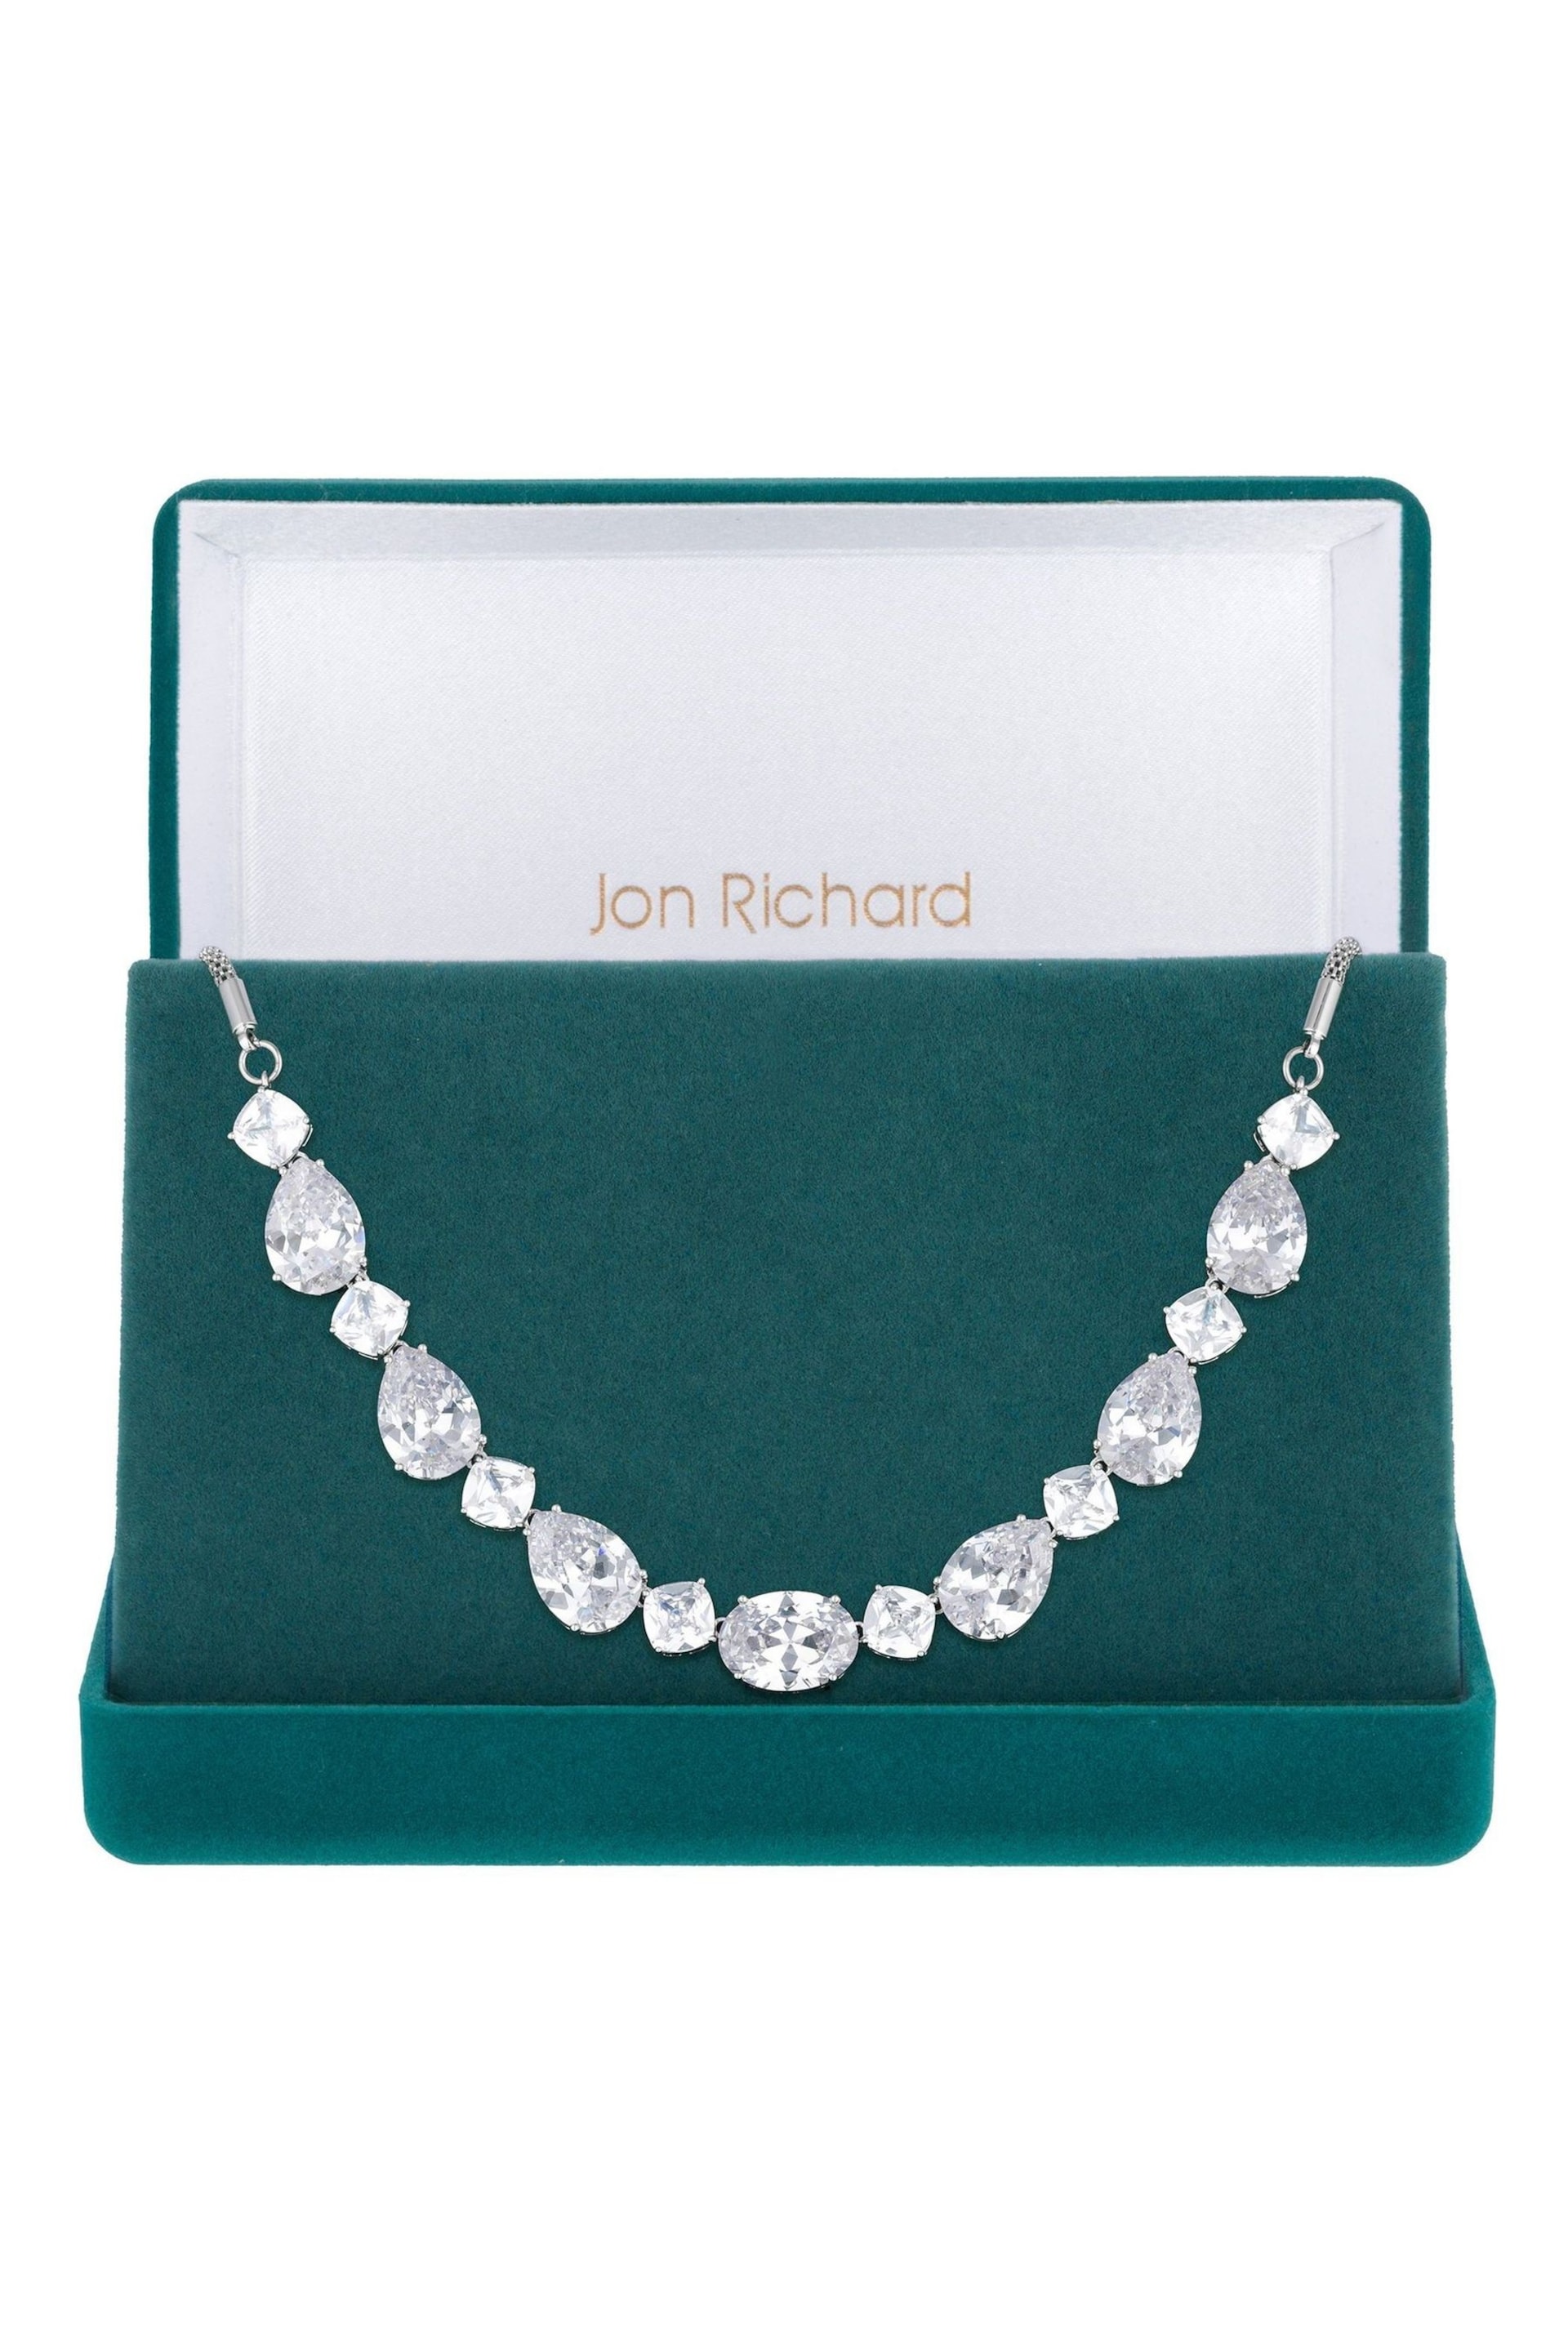 Jon Richard Silver Cubic Zirconia Mixed Stone Necklace - Gift Boxed - Image 1 of 4